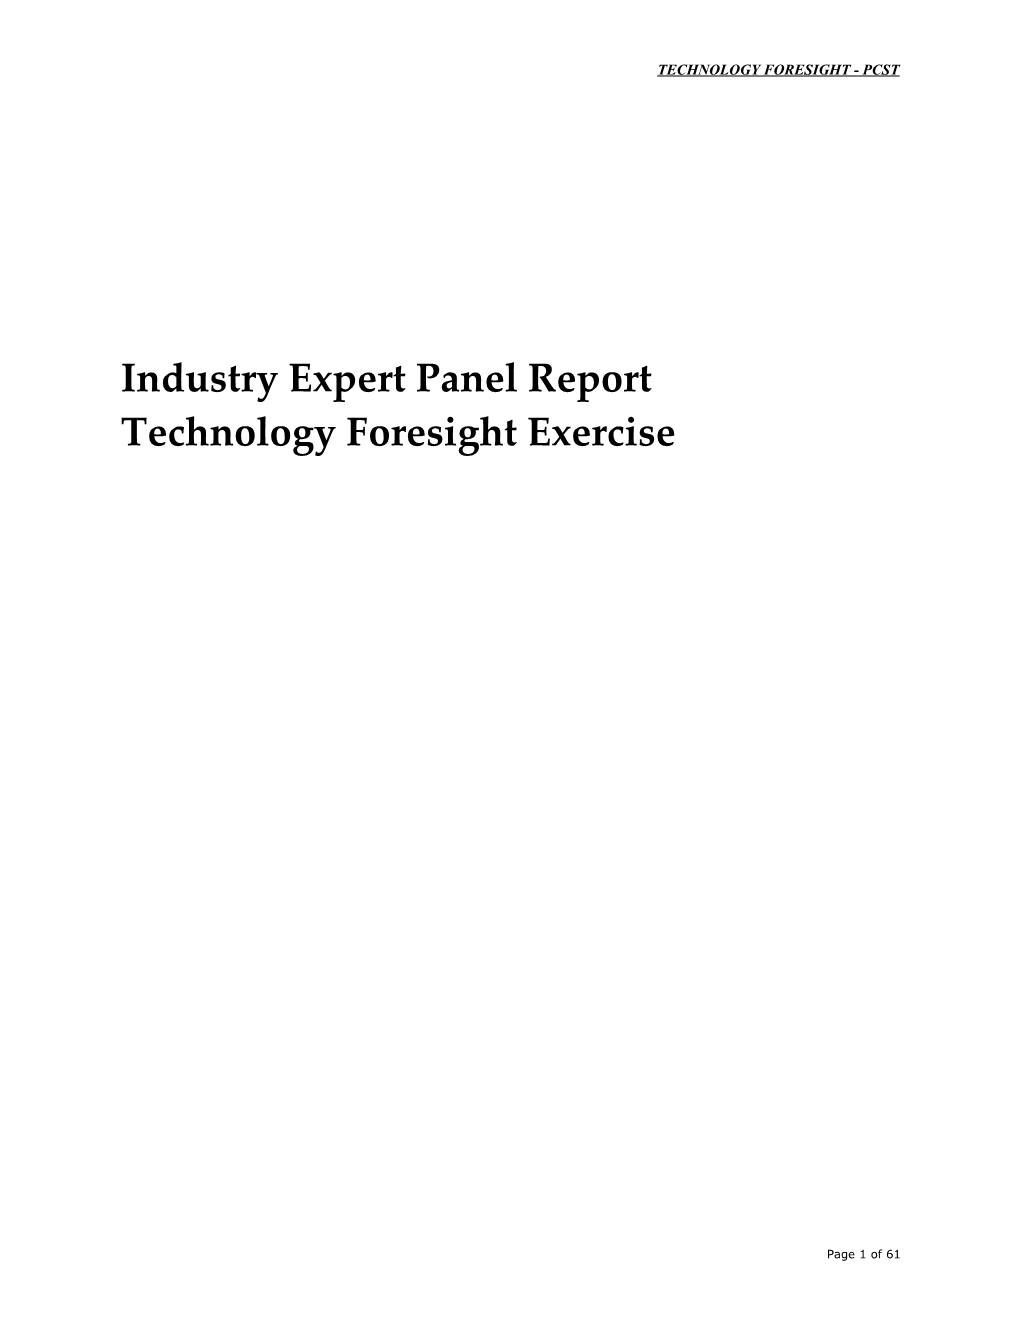 Experts Views About Pakistan Energy Technology: Lessons Learnt from Technology Foresight 2015